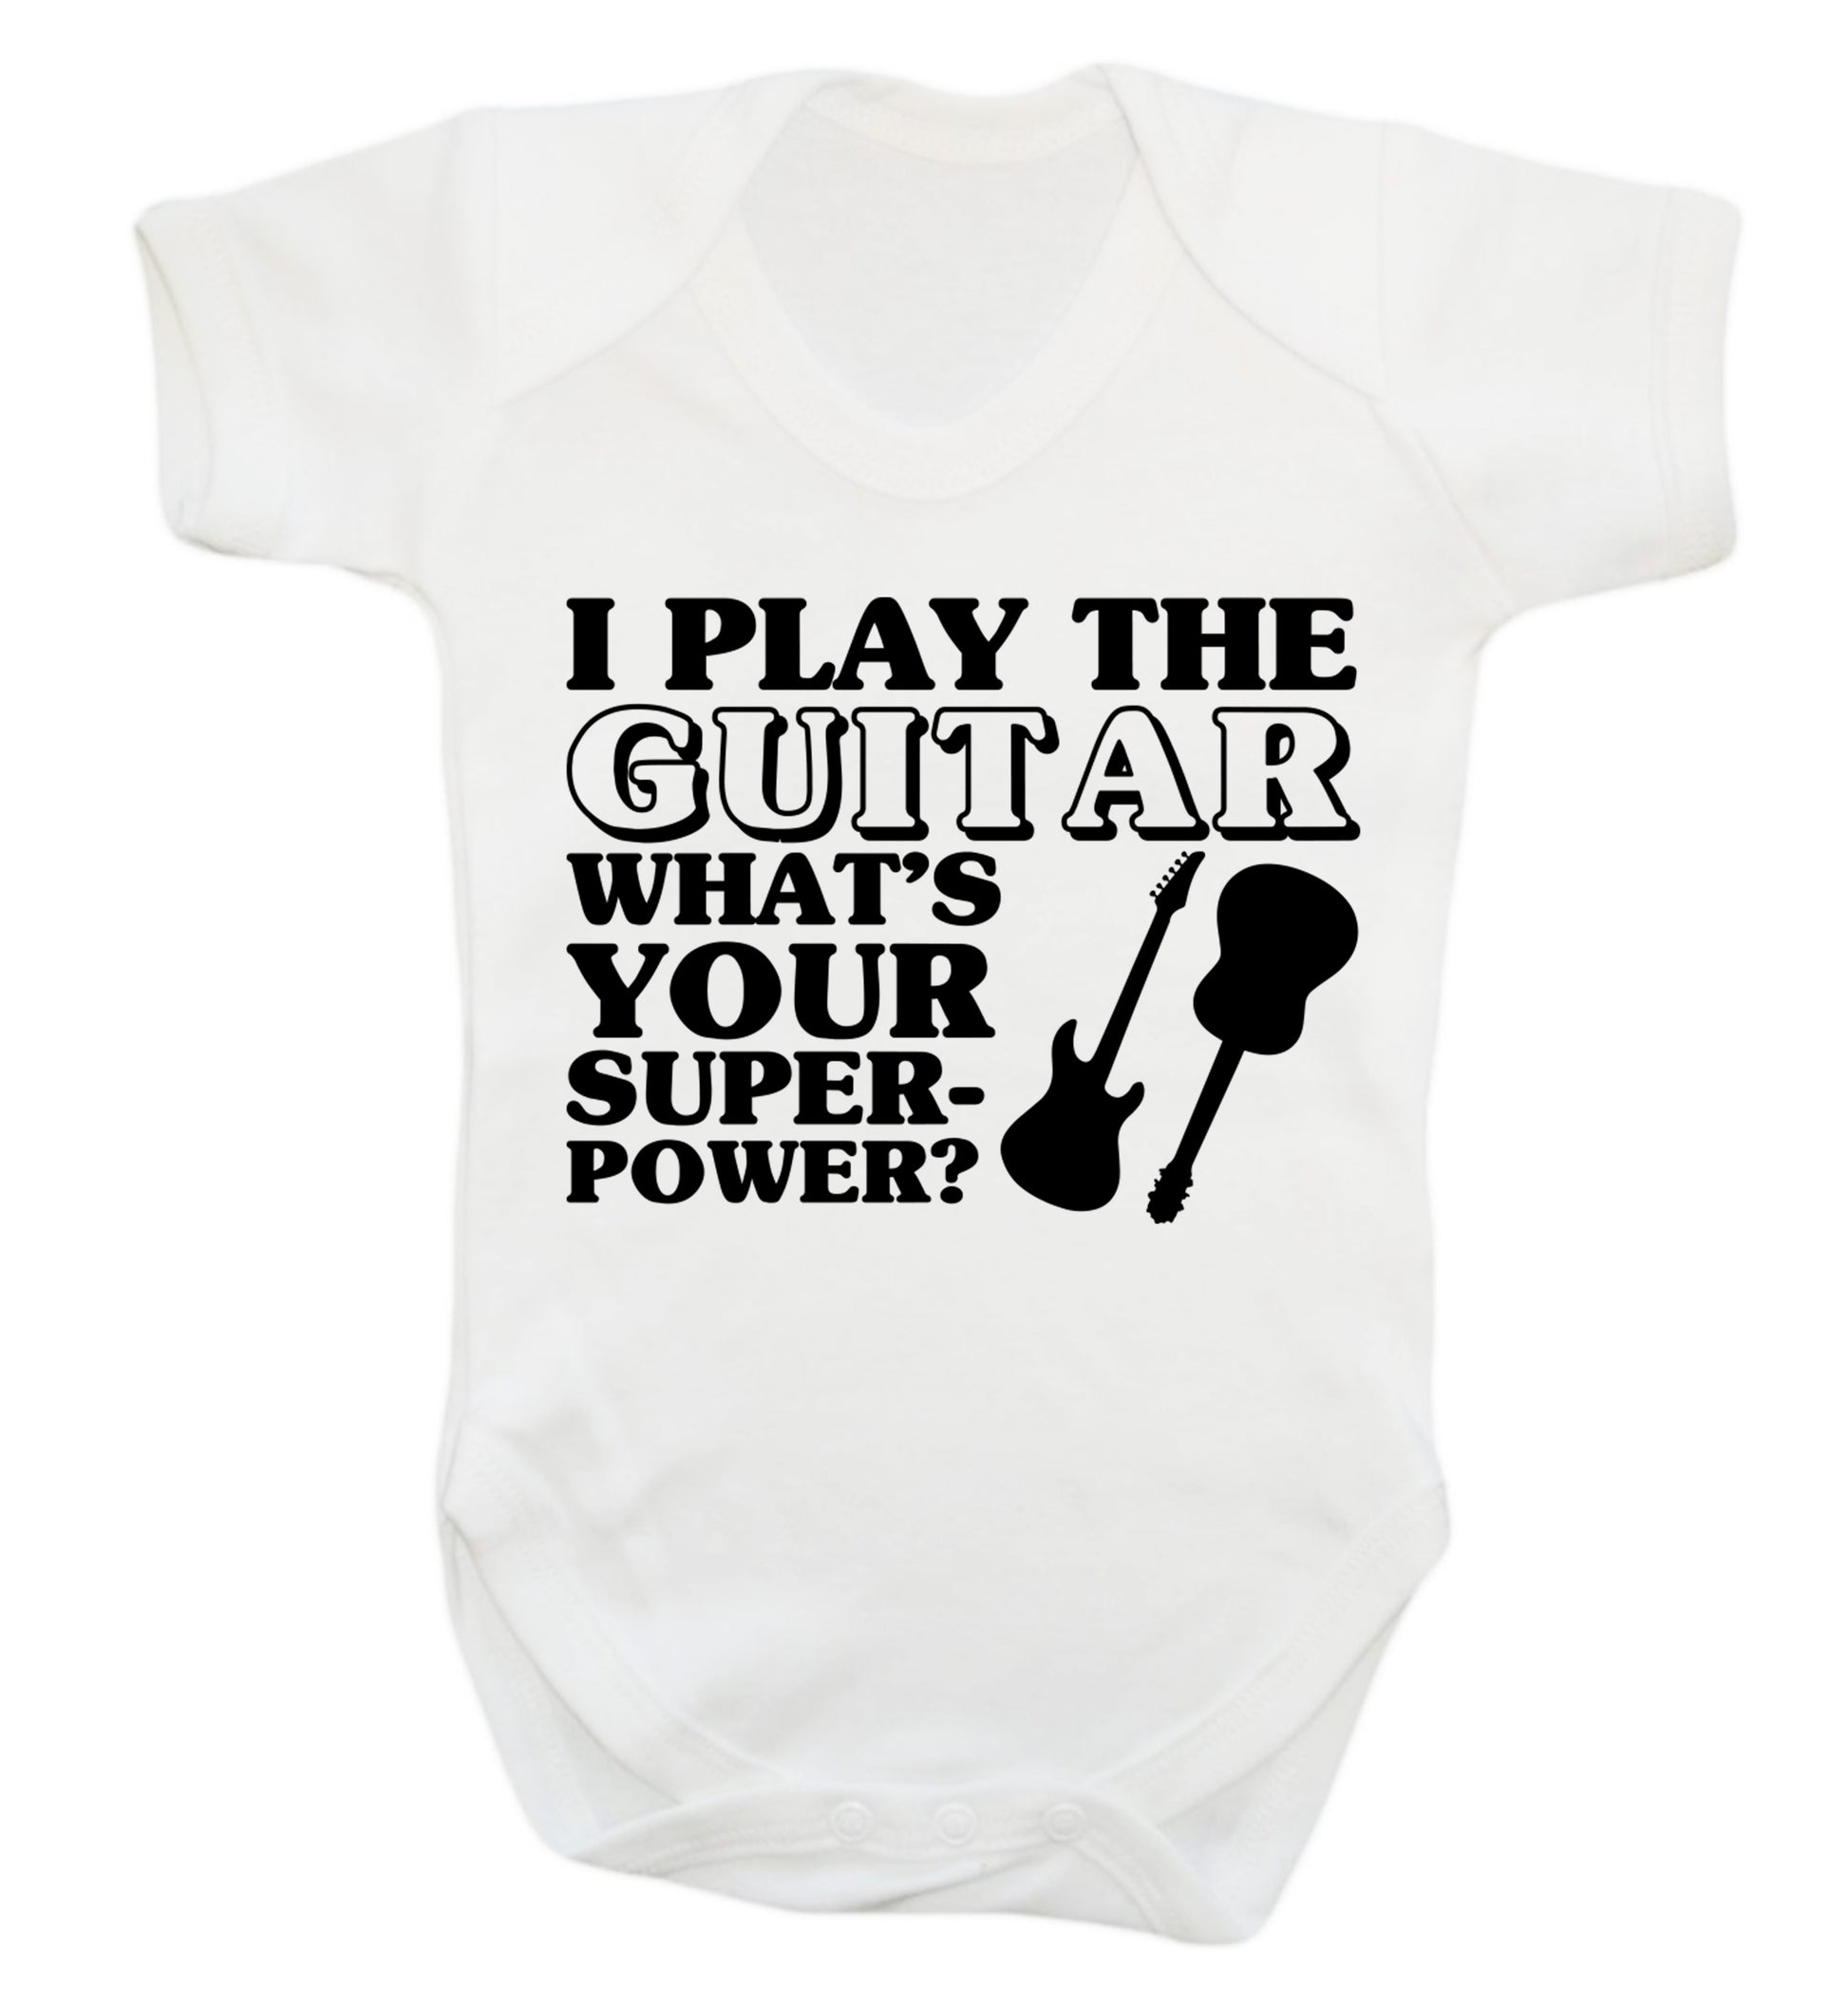 I play the guitar what's your superpower? Baby Vest white newborn